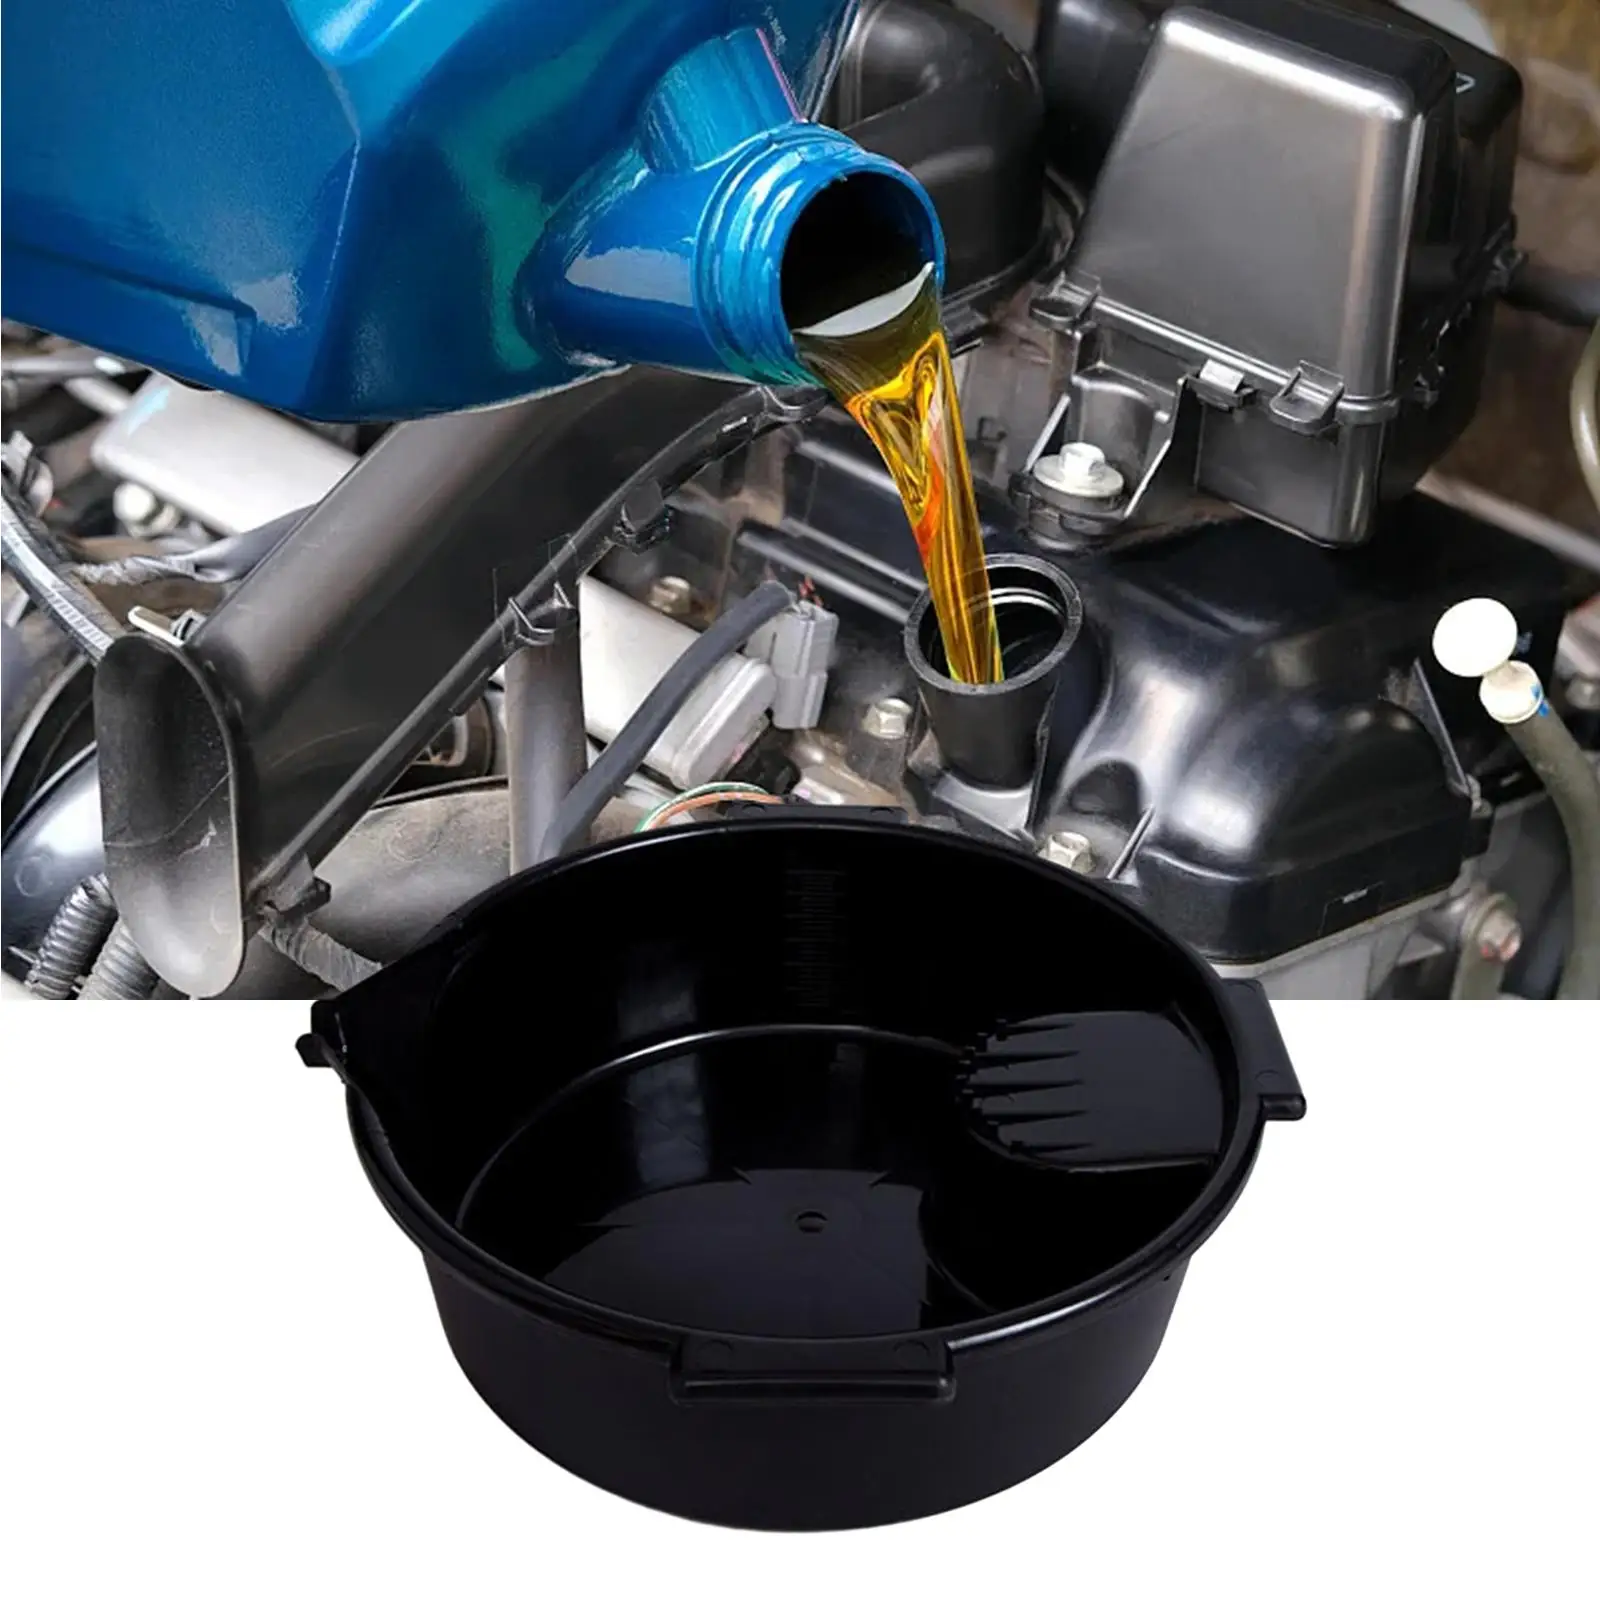 Oil Drain Container Garage Tool Portable All Purpose Oil Change Pan Motor Oil